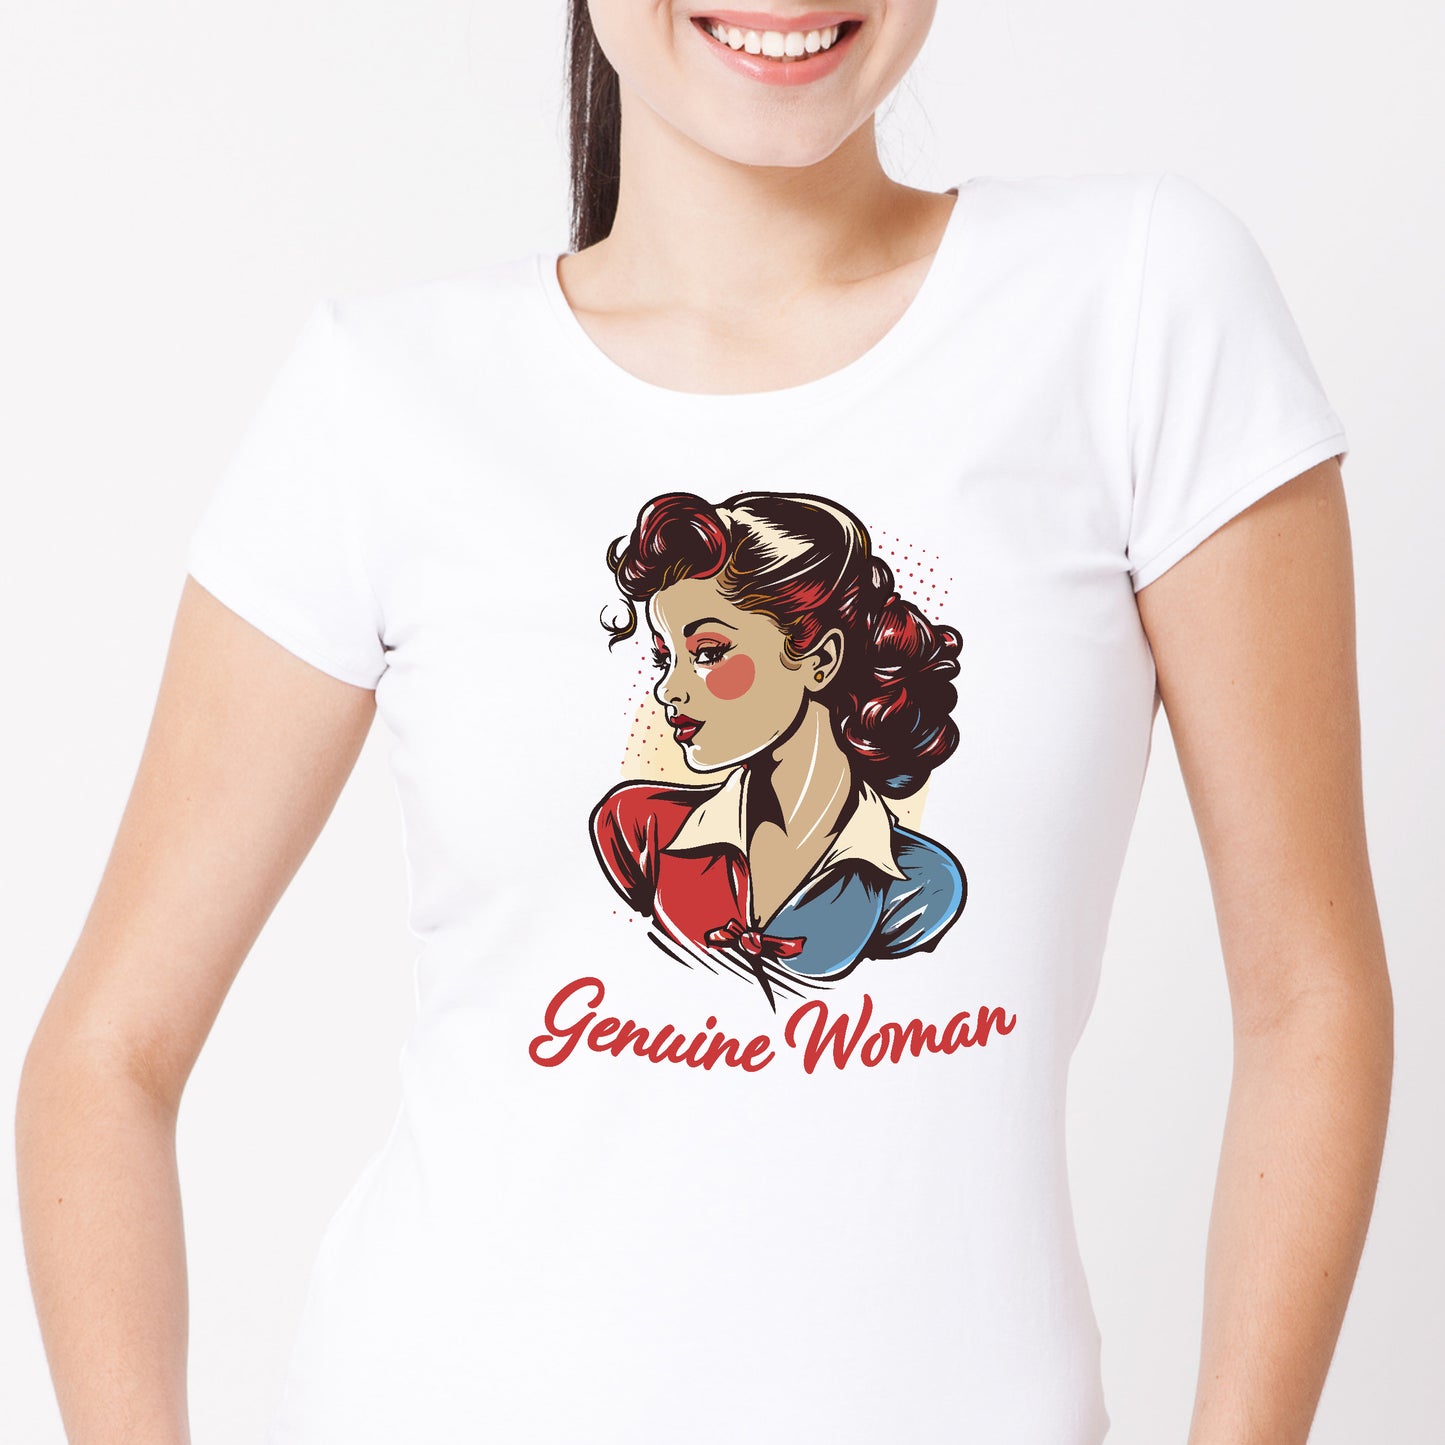 Genuine Woman T-Shirt Real Woman TShirt For Mother's Day Gift For Mom Shirt Conservative T Shirt Retro Woman Shirt Retro Pinup Girl T-Shirt